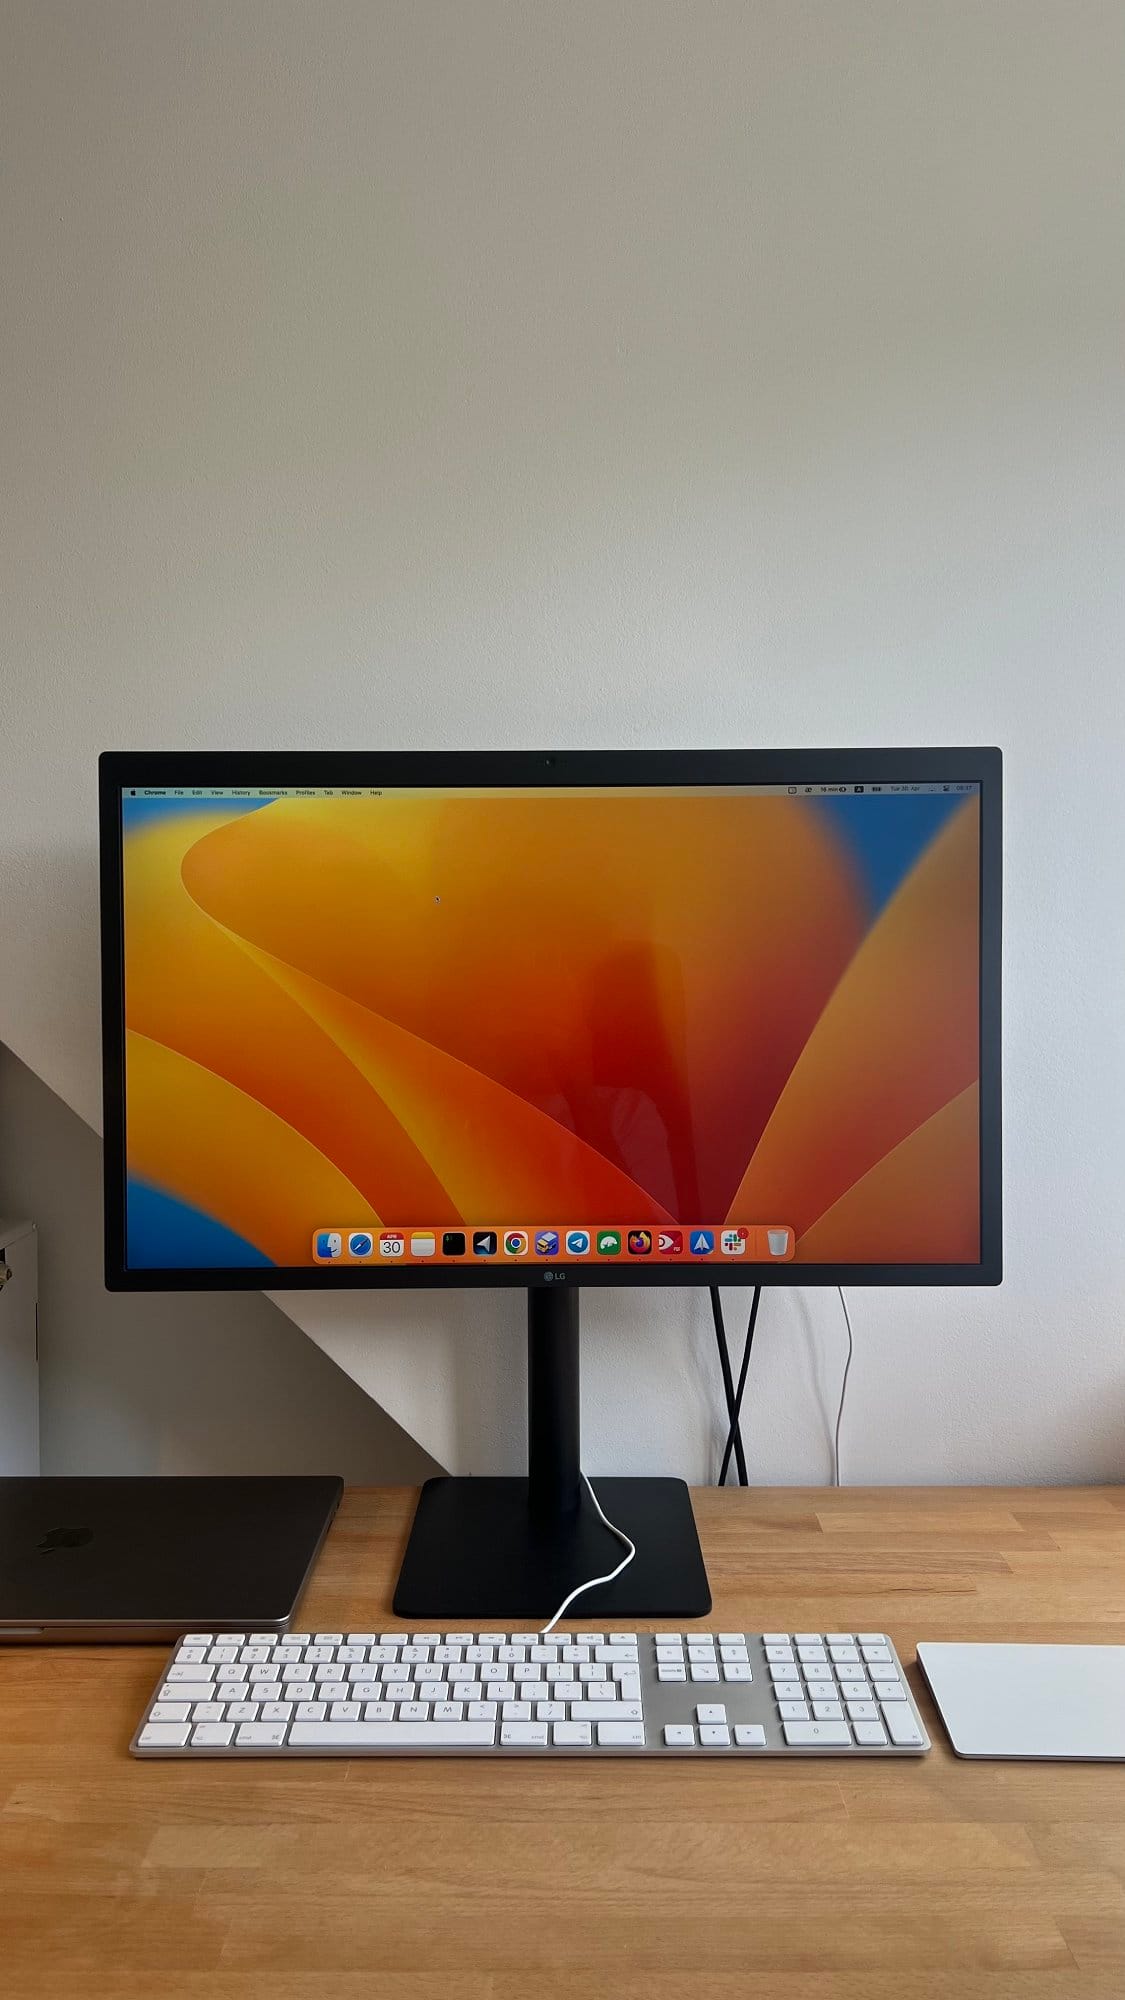 A minimalist home office setup featuring an LG UltraFine 5K monitor displaying a macOS desktop, a MacBook Pro M1 16″ 2021, an Apple Magic Keyboard, and an Apple Trackpad II, all arranged neatly on an IKEA GERTON tabletop